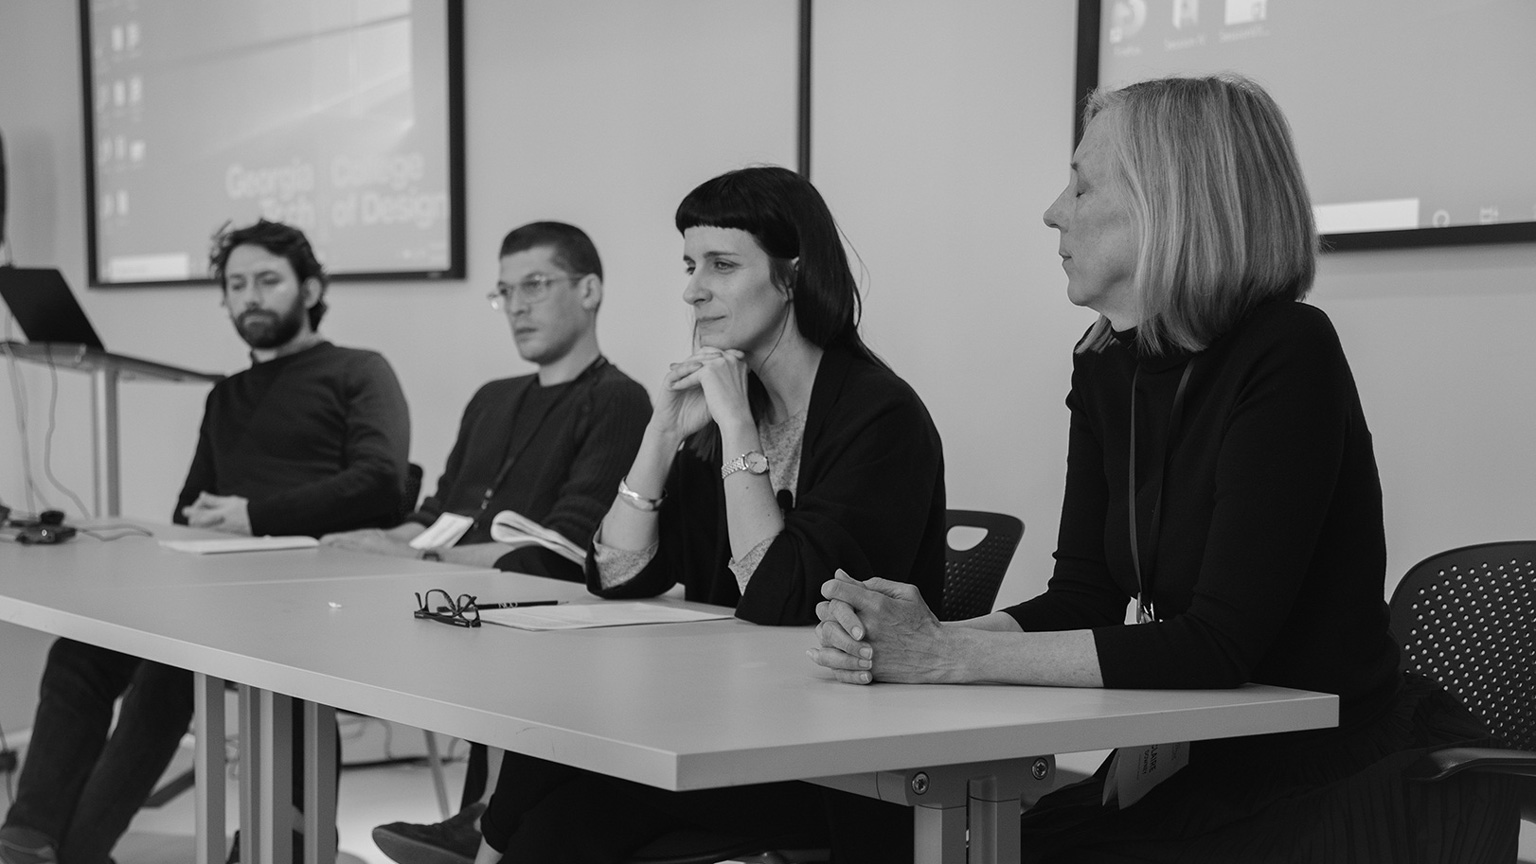 Black-and-white photo of a discussion panel